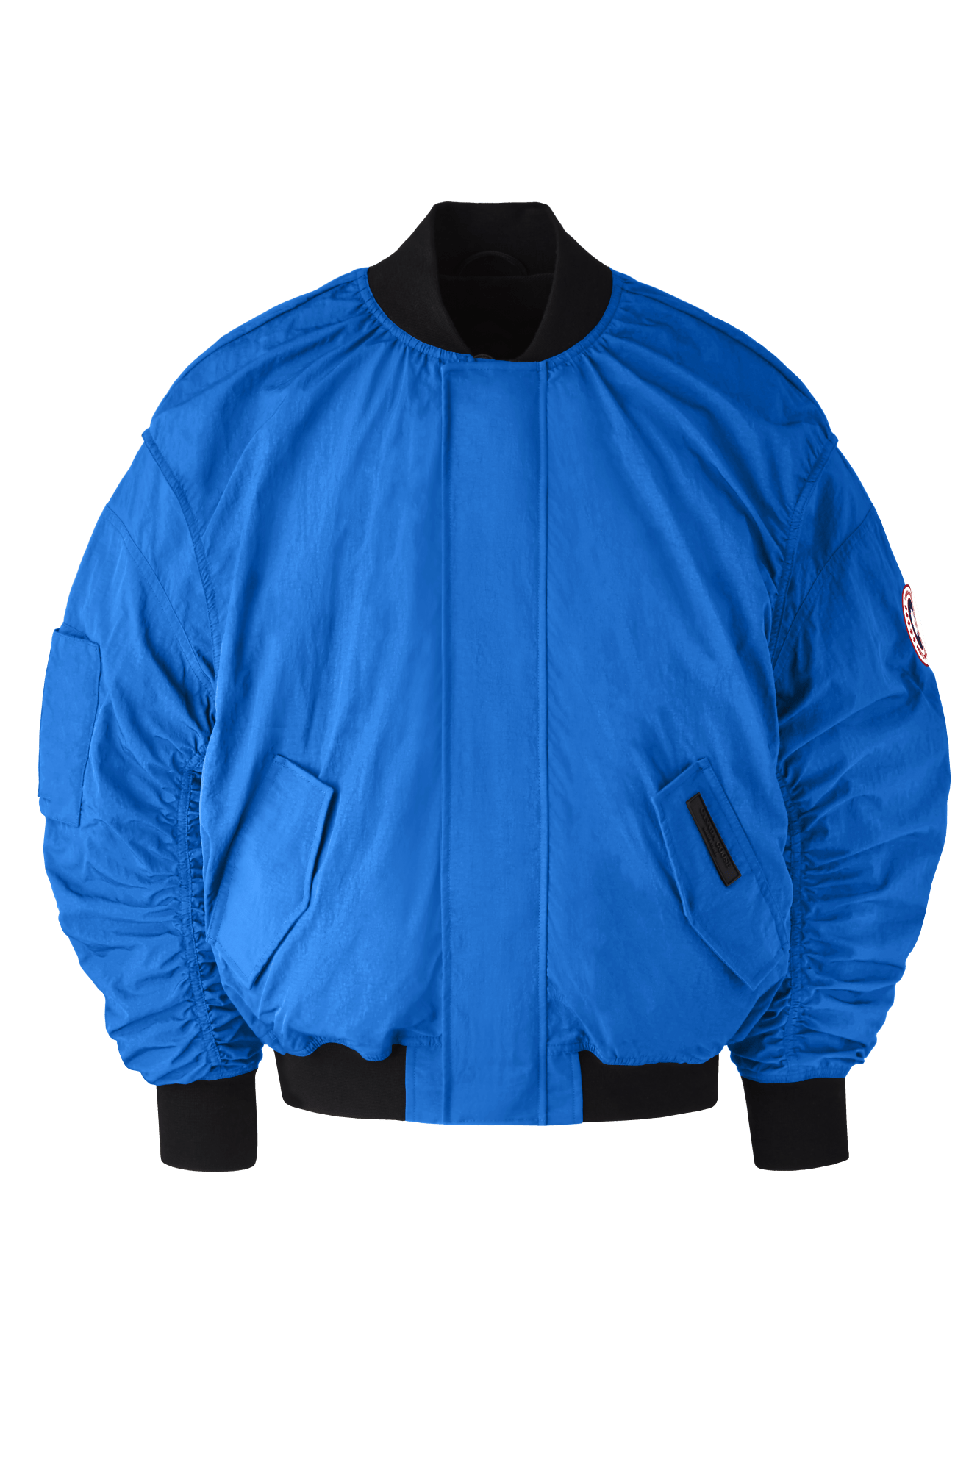 Angel Chen for Canada Goose Collaboration Details, Prices, and Where to Buy